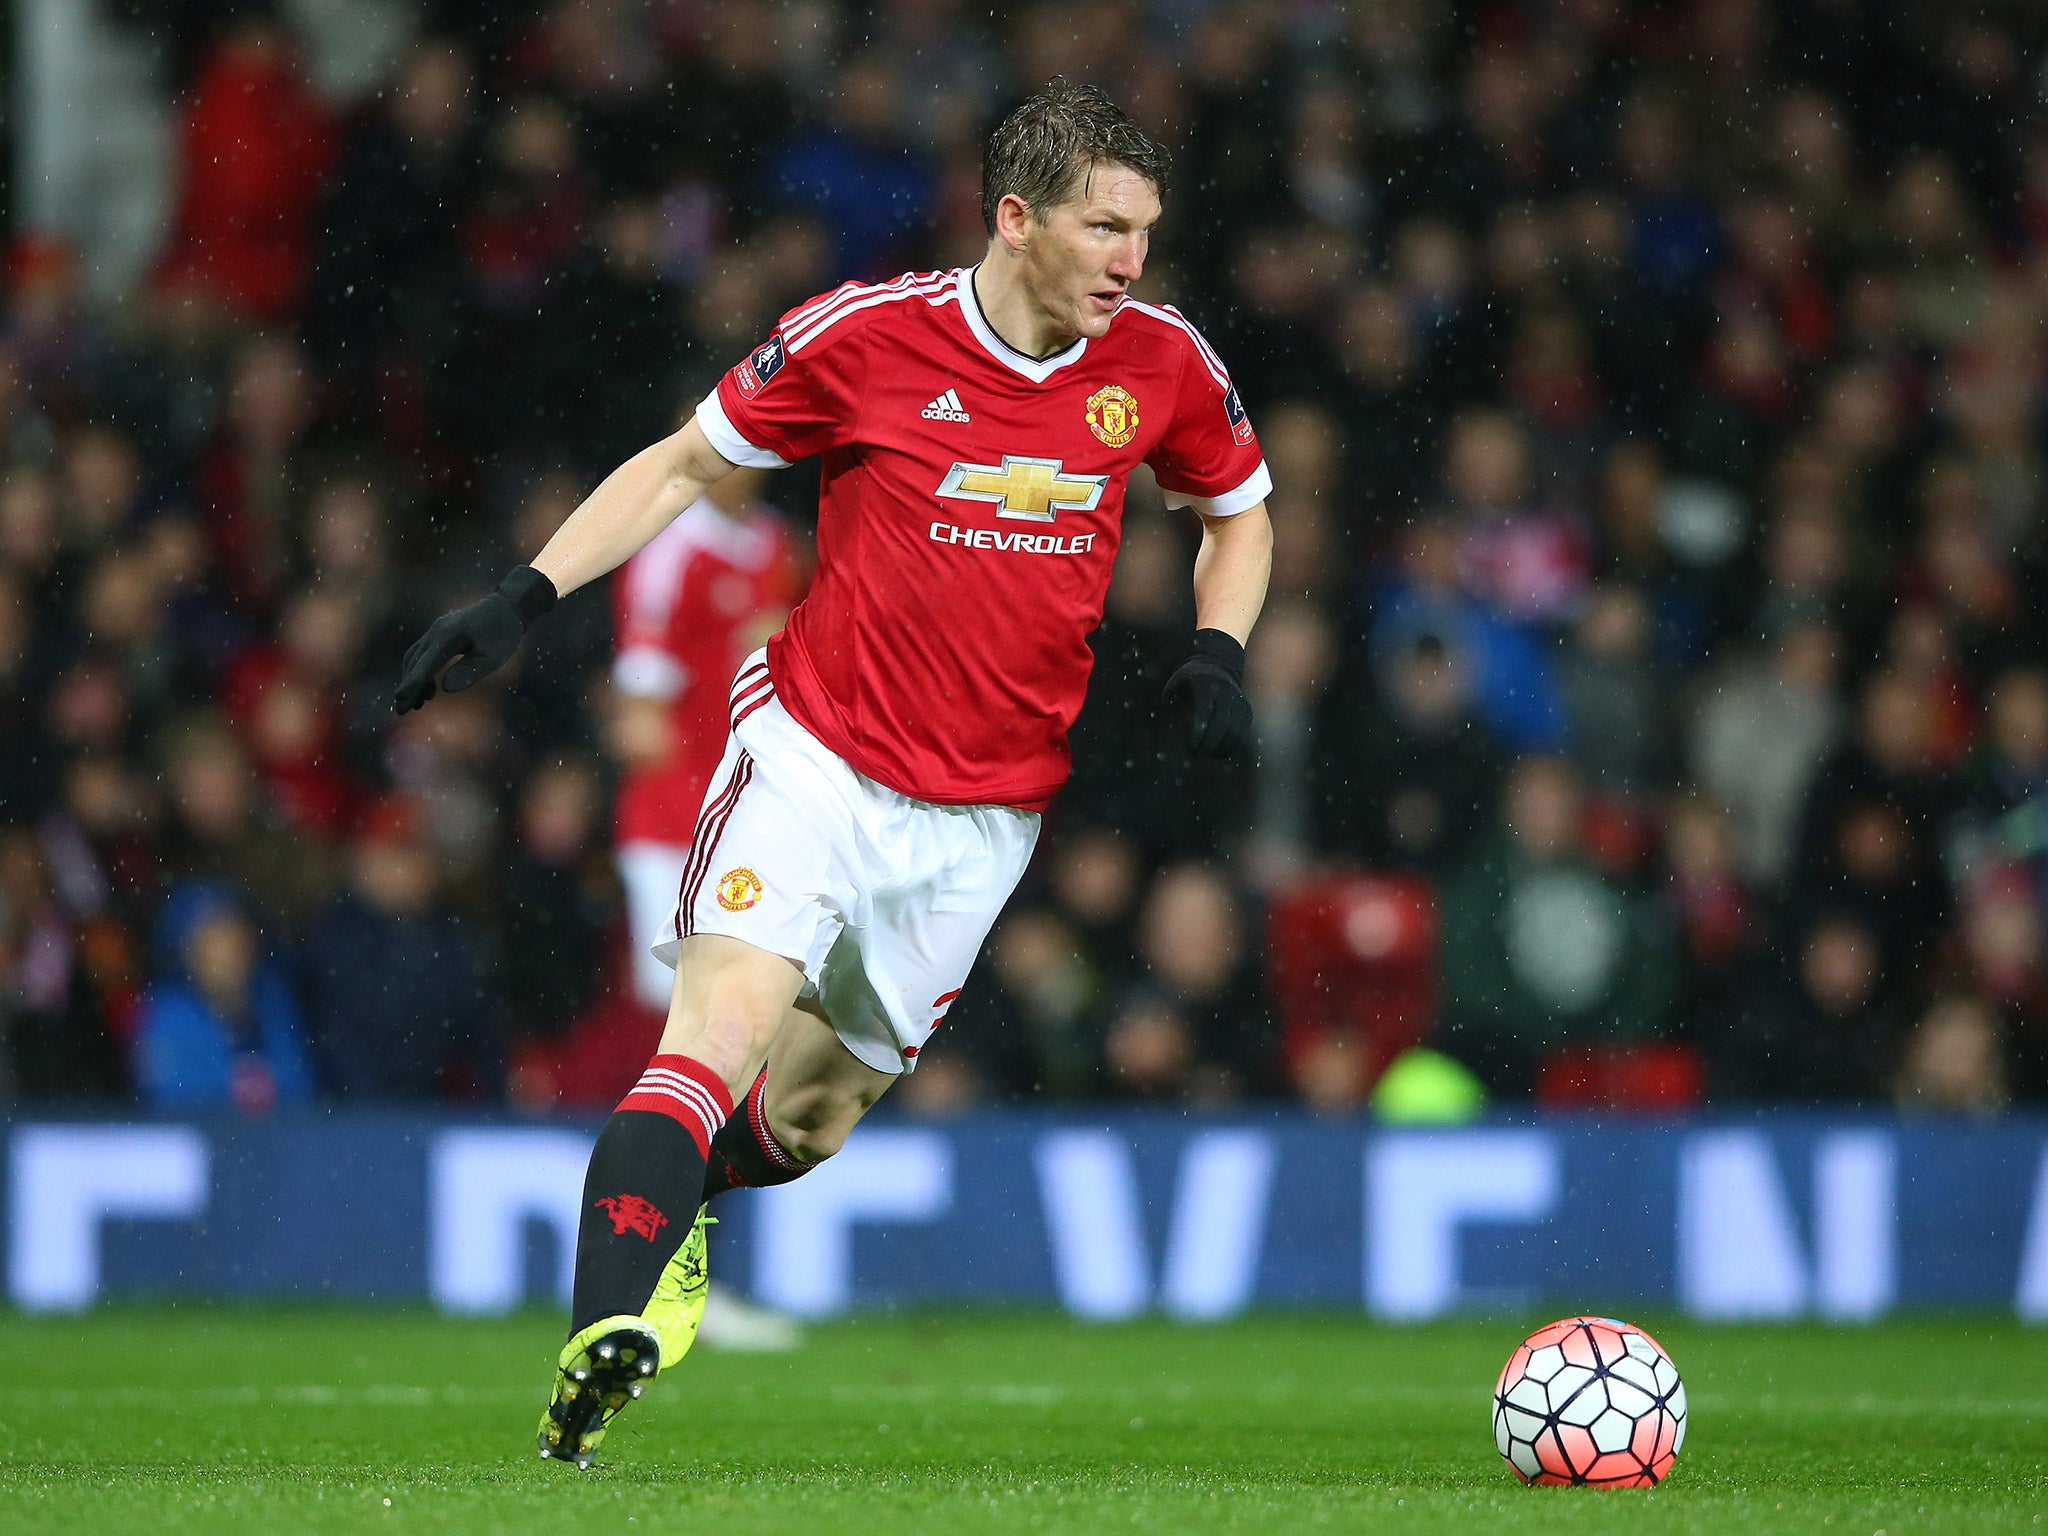 Bastian Schweinsteiger has been told he can leave Manchester United